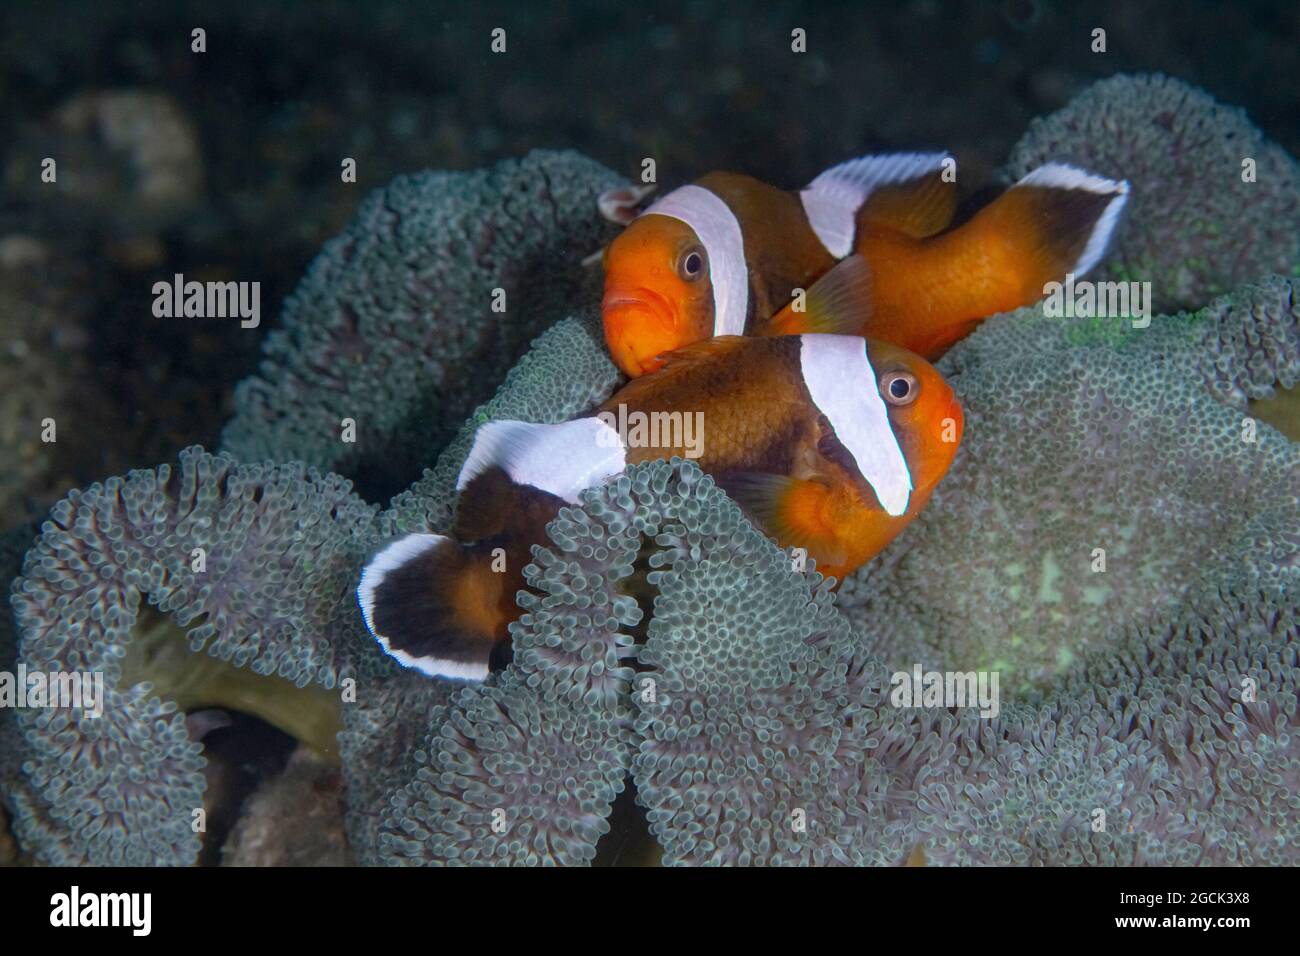 Closeup of pair of bright colorful striped Amphiprion polymnus or Saddleback clownfish fishes swimming at sea bottom Stock Photo